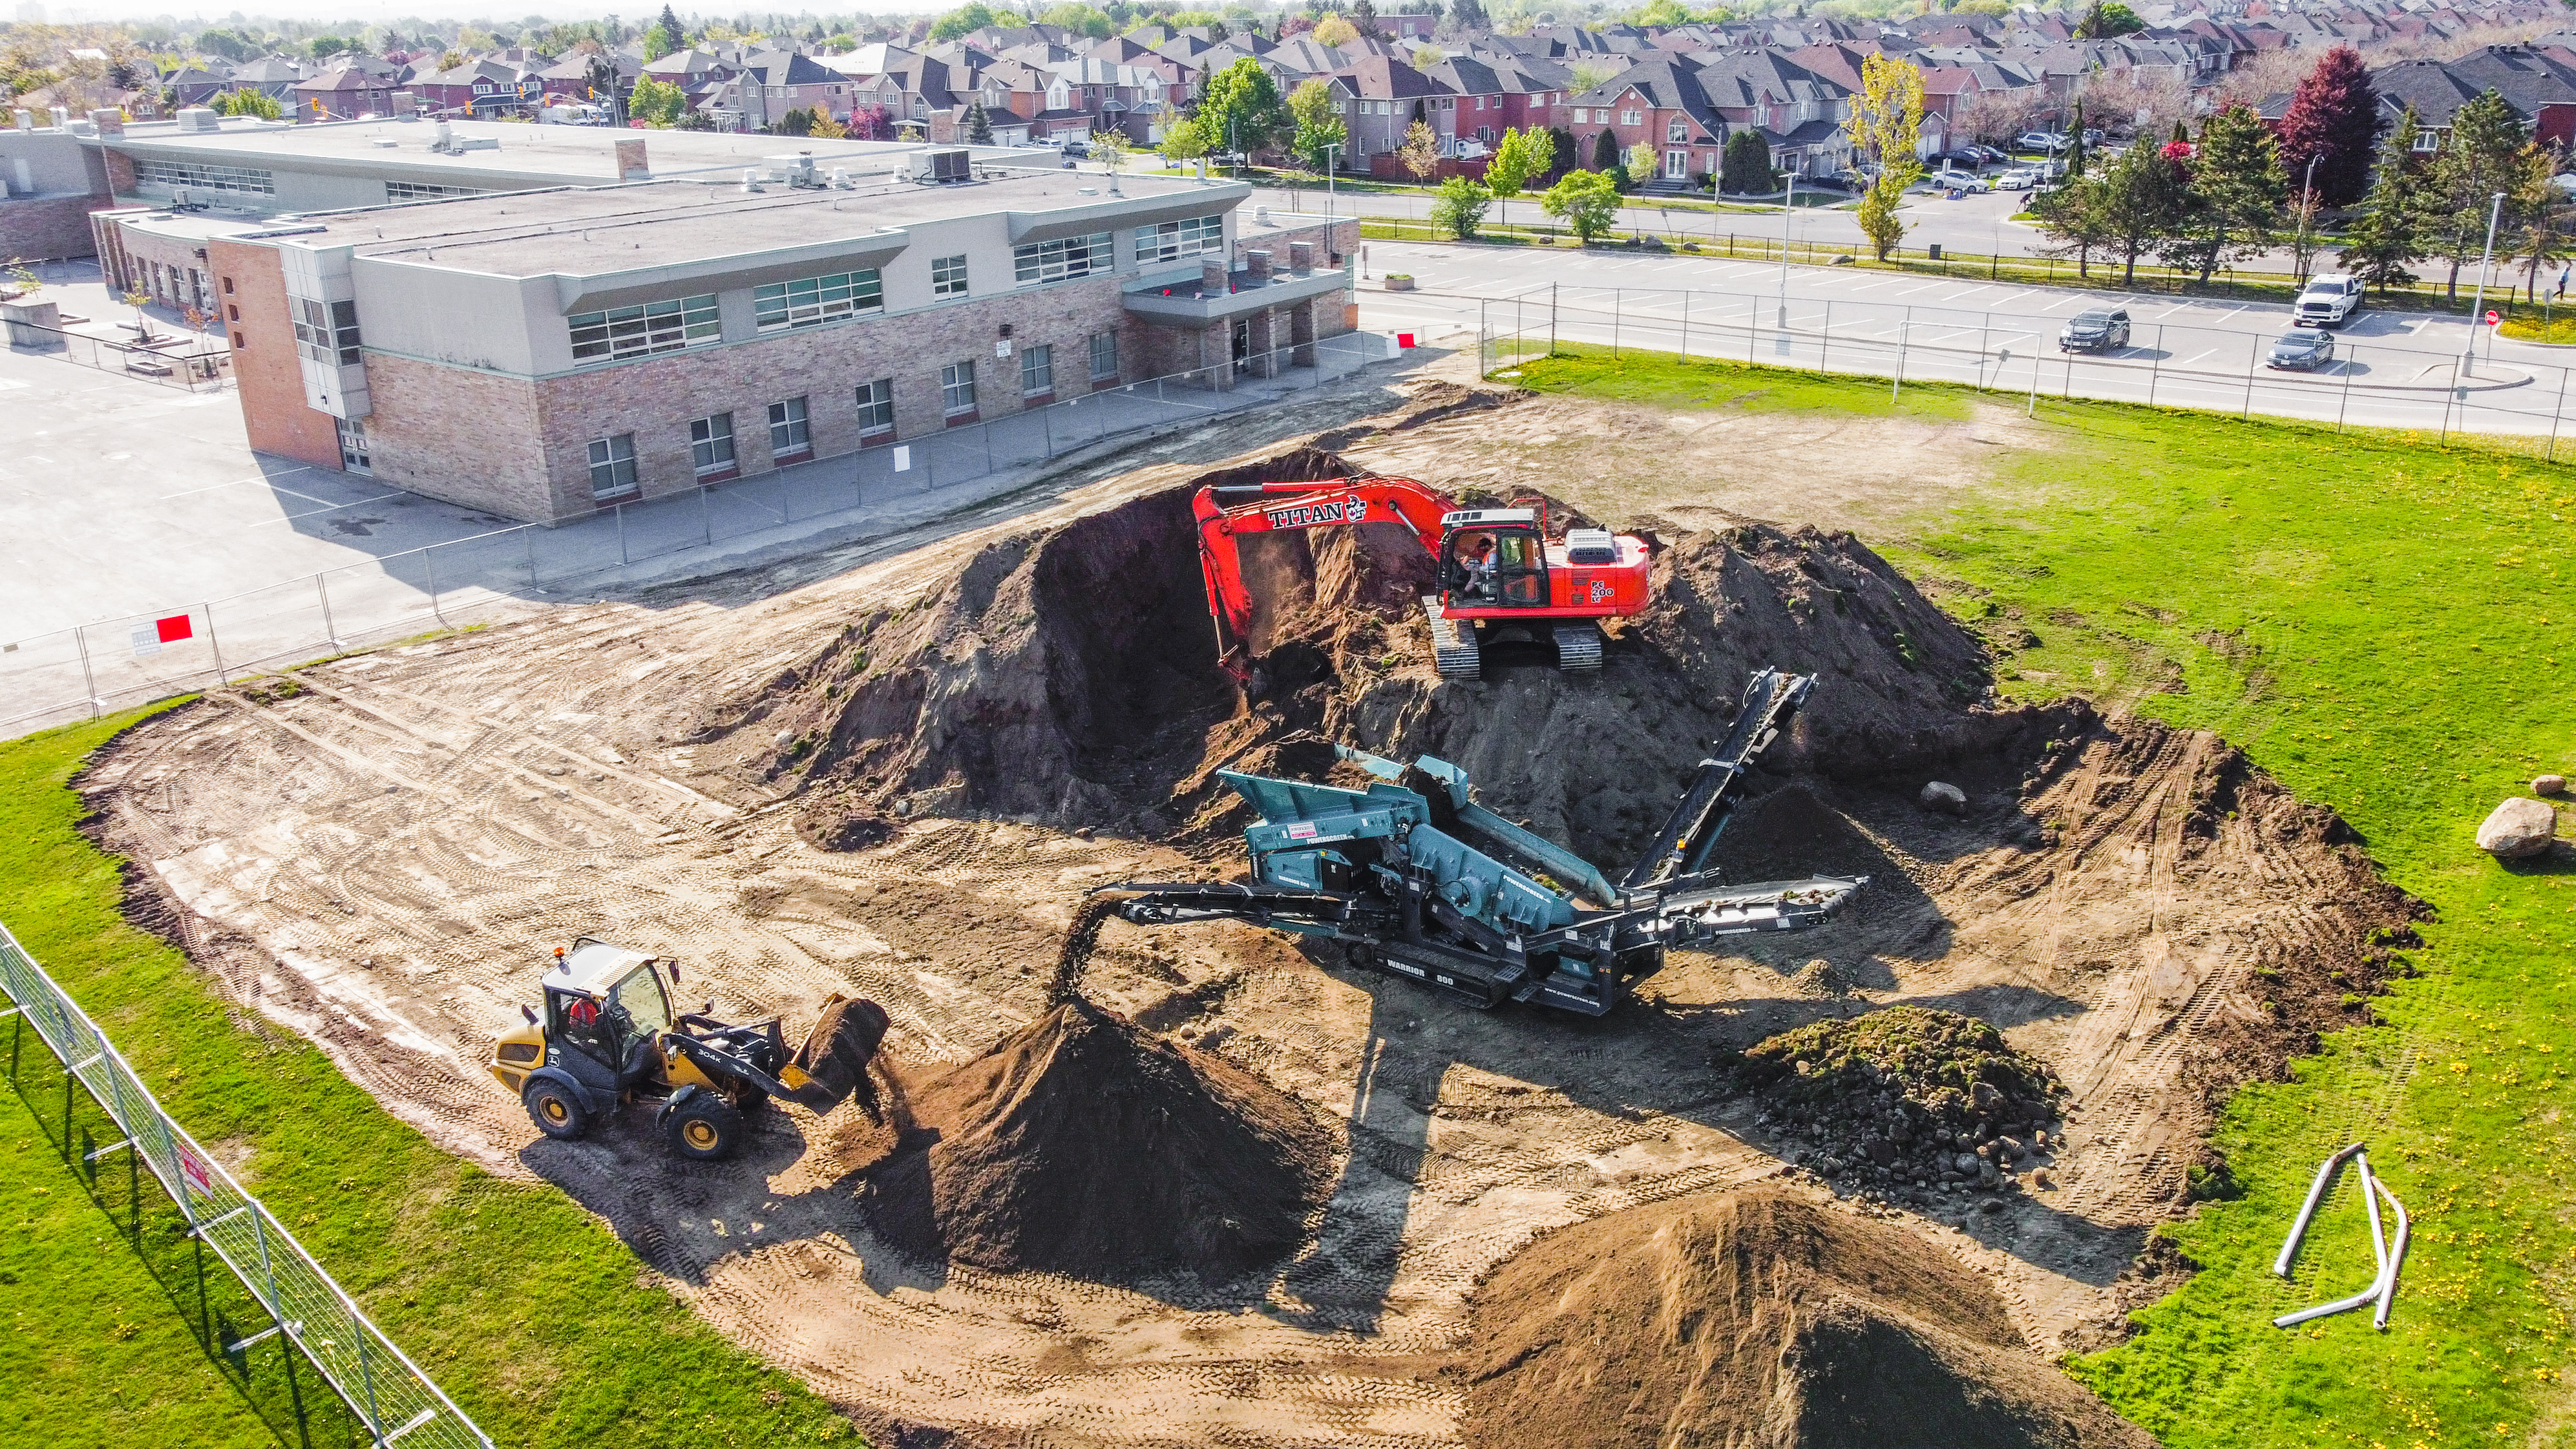 Construction vehicles on a school's field